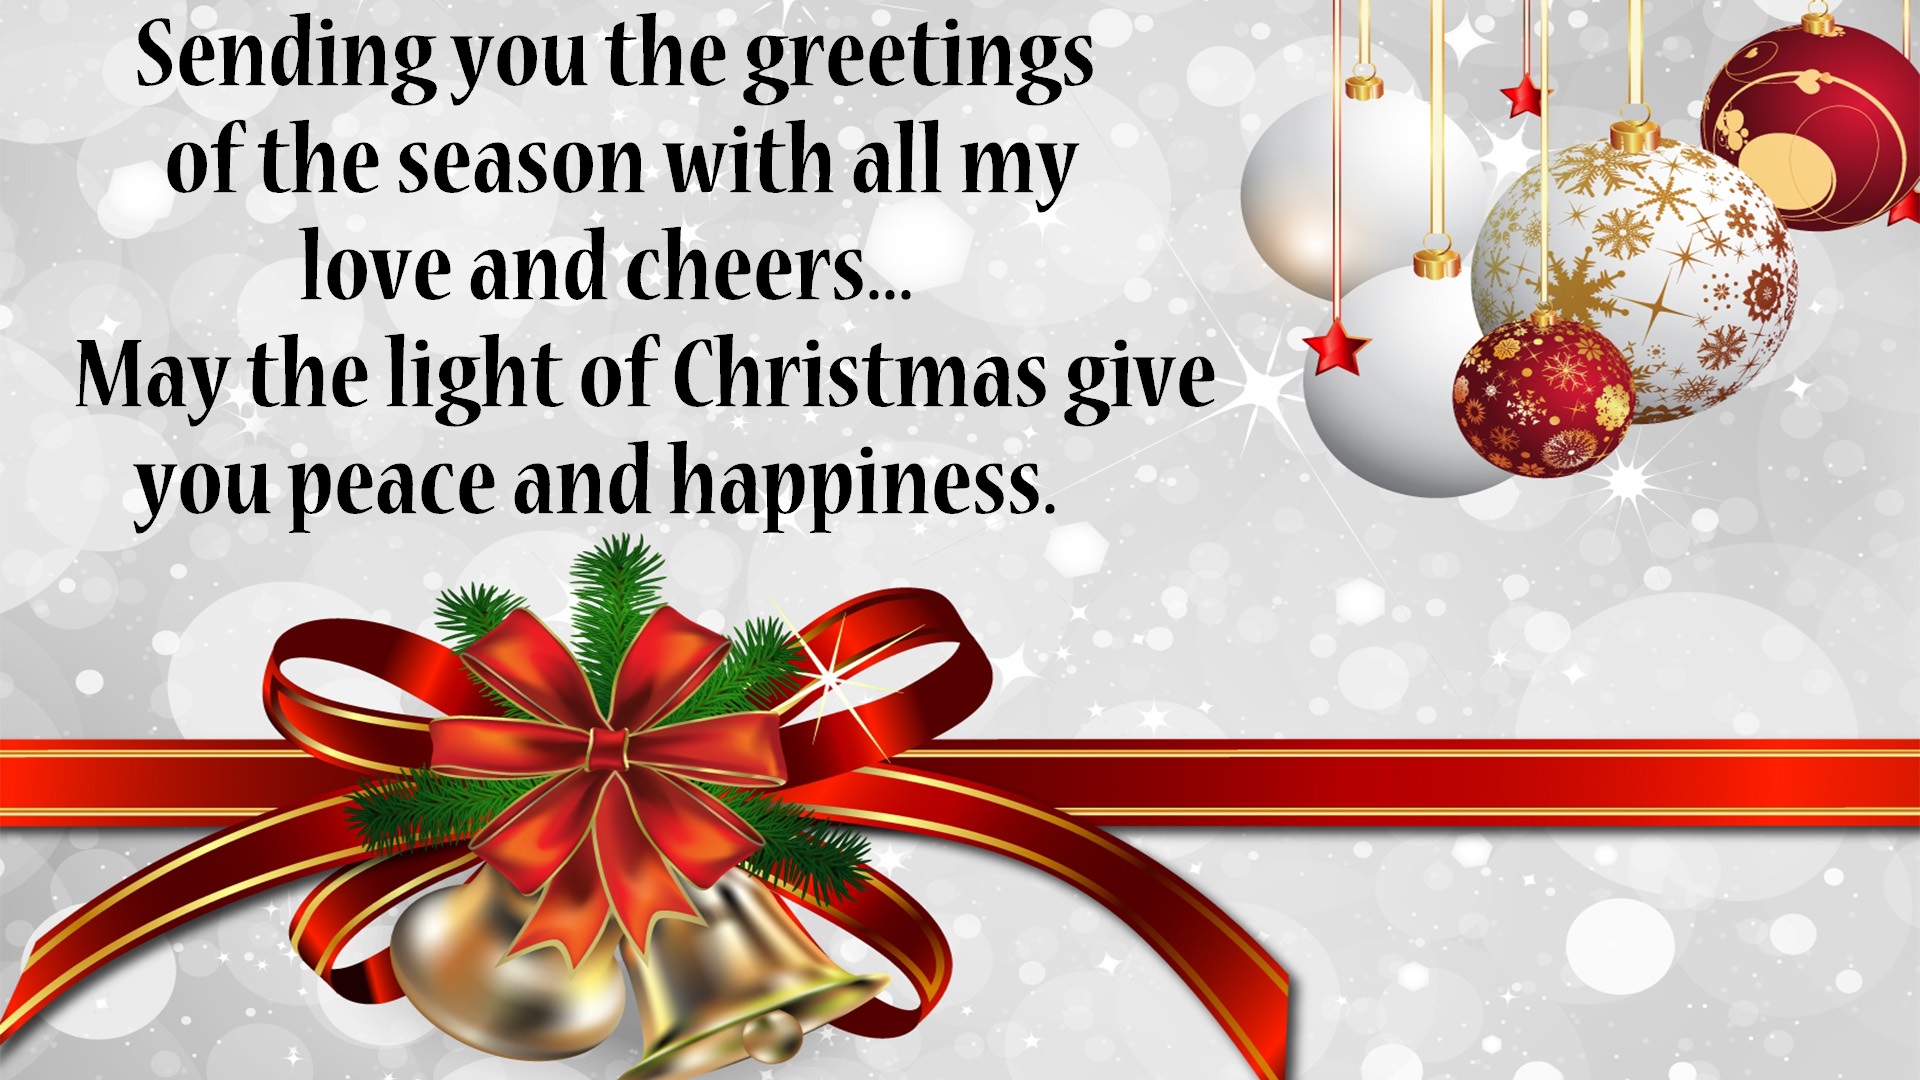 beautiful wishes for christmas 2017 image